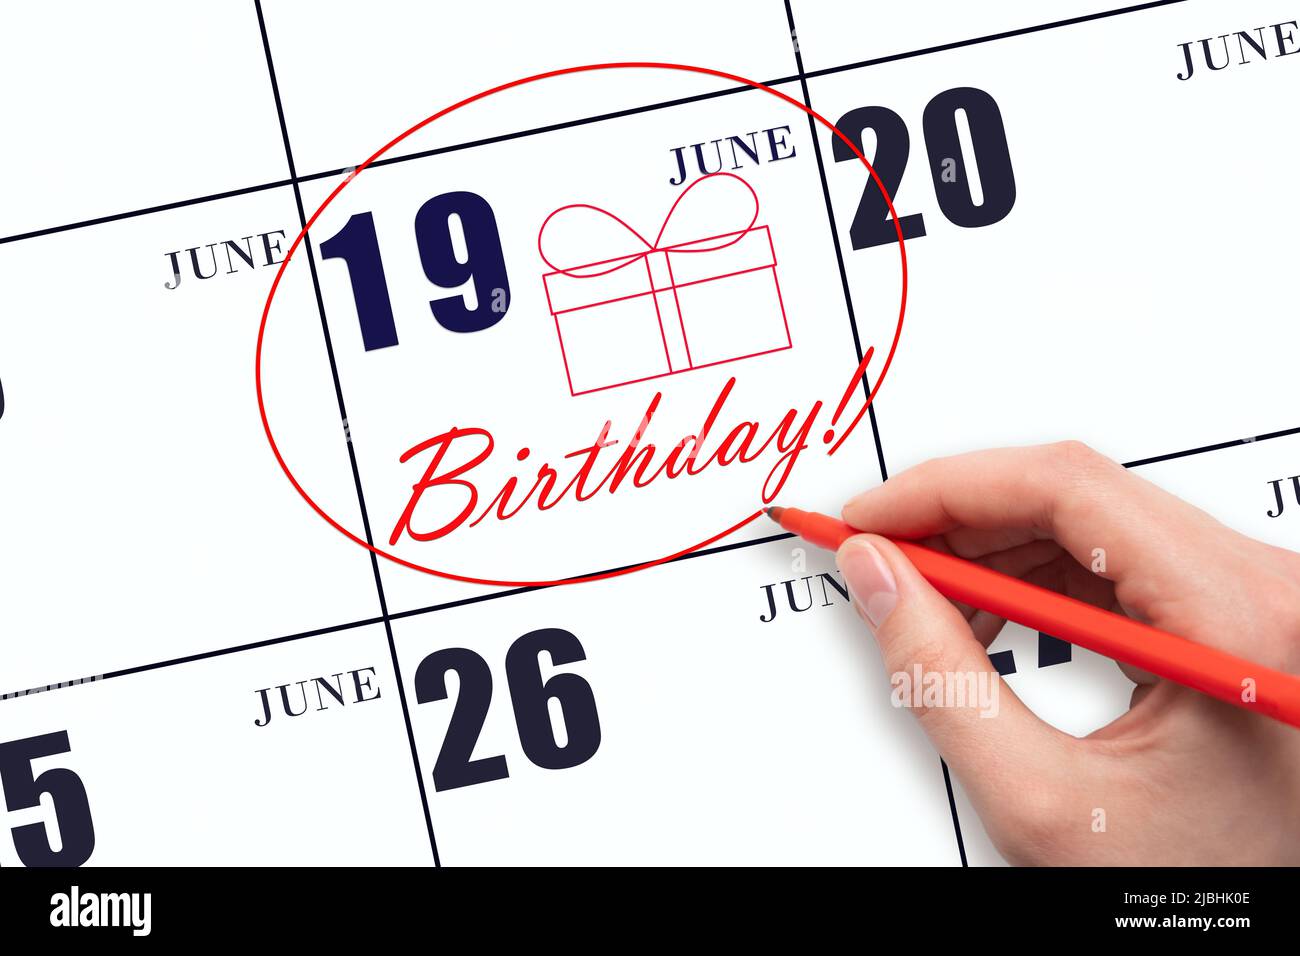 19th day of June. The hand circles the date on the calendar 19 June, draws a gift box and writes the text Birthday. Holiday. Summer month, day of the Stock Photo - Alamy